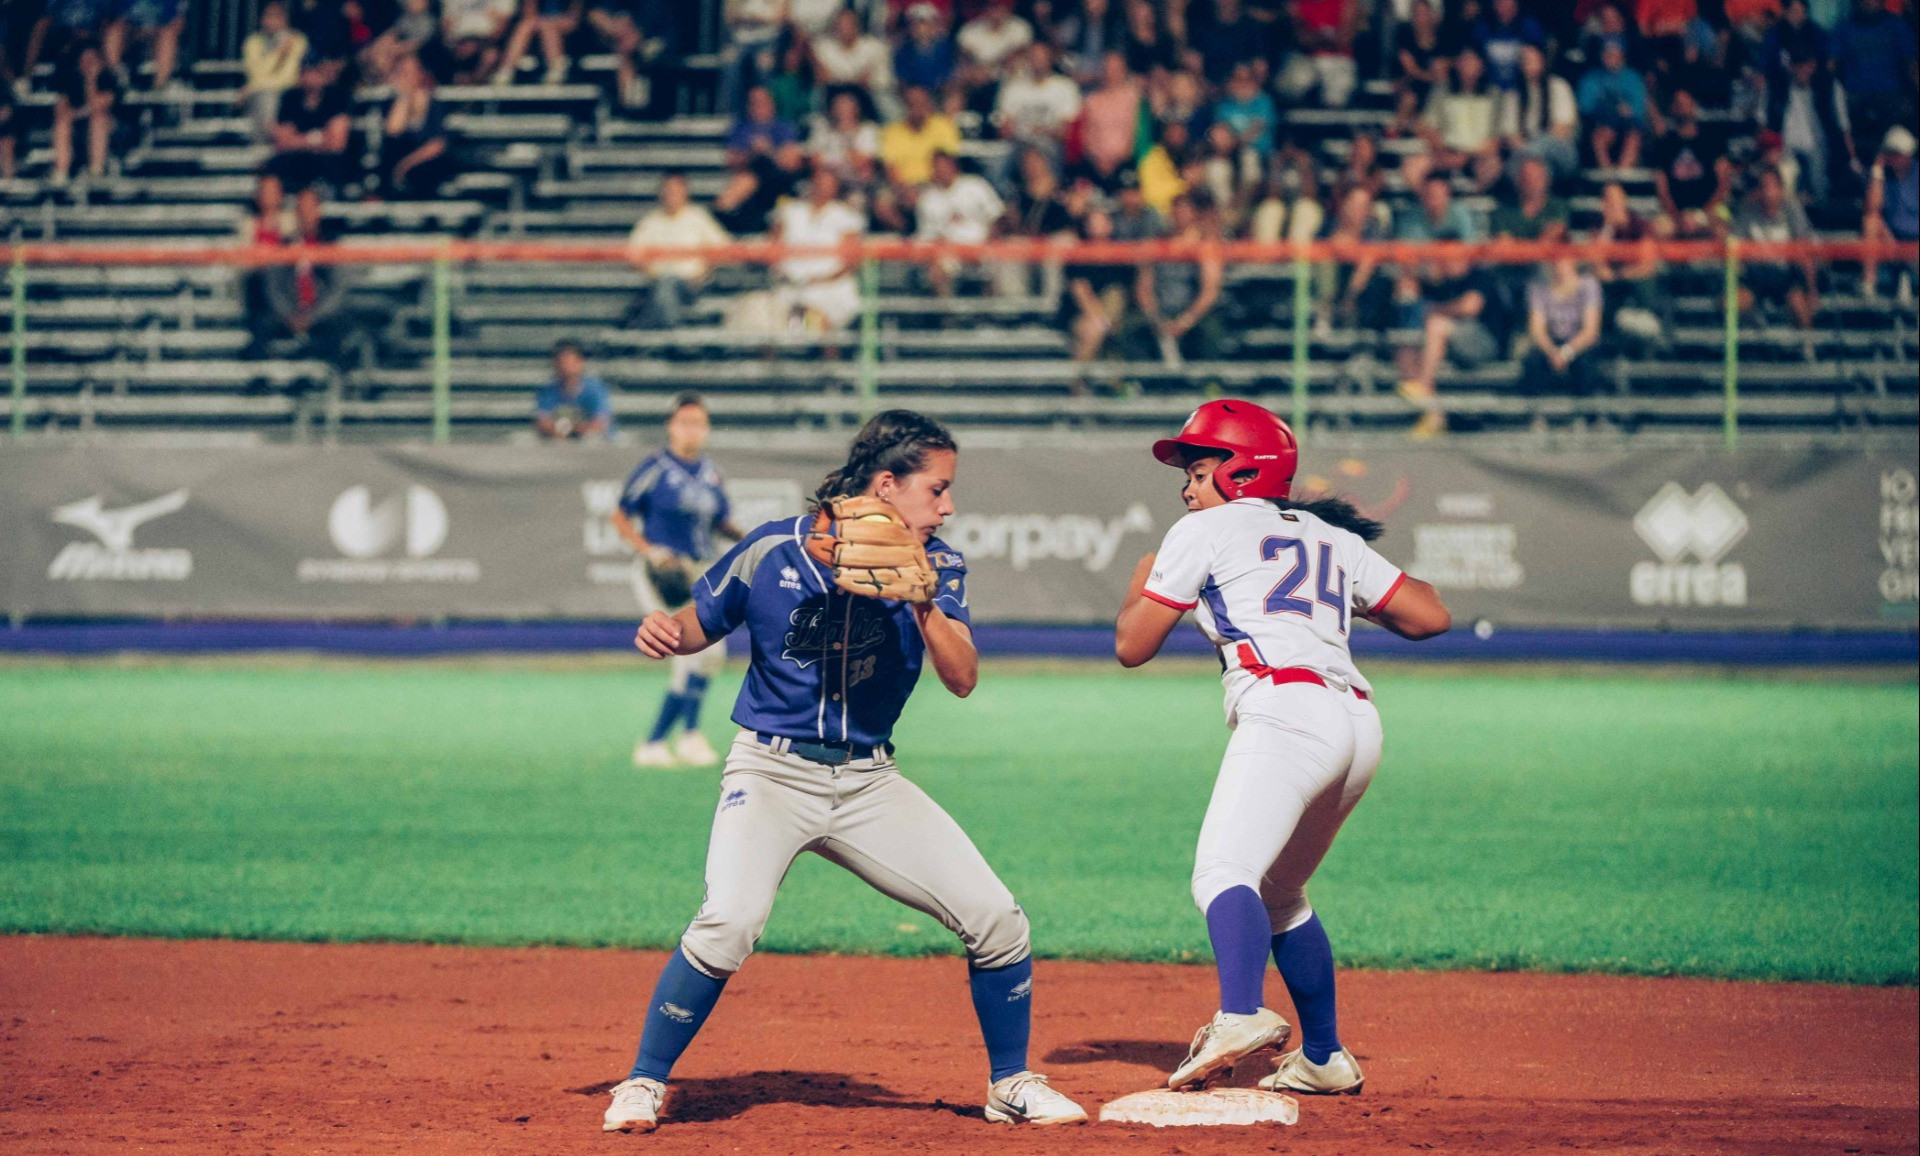 Walk-off win secures Philippines place in Women’s Softball World Cup Group C playoffs